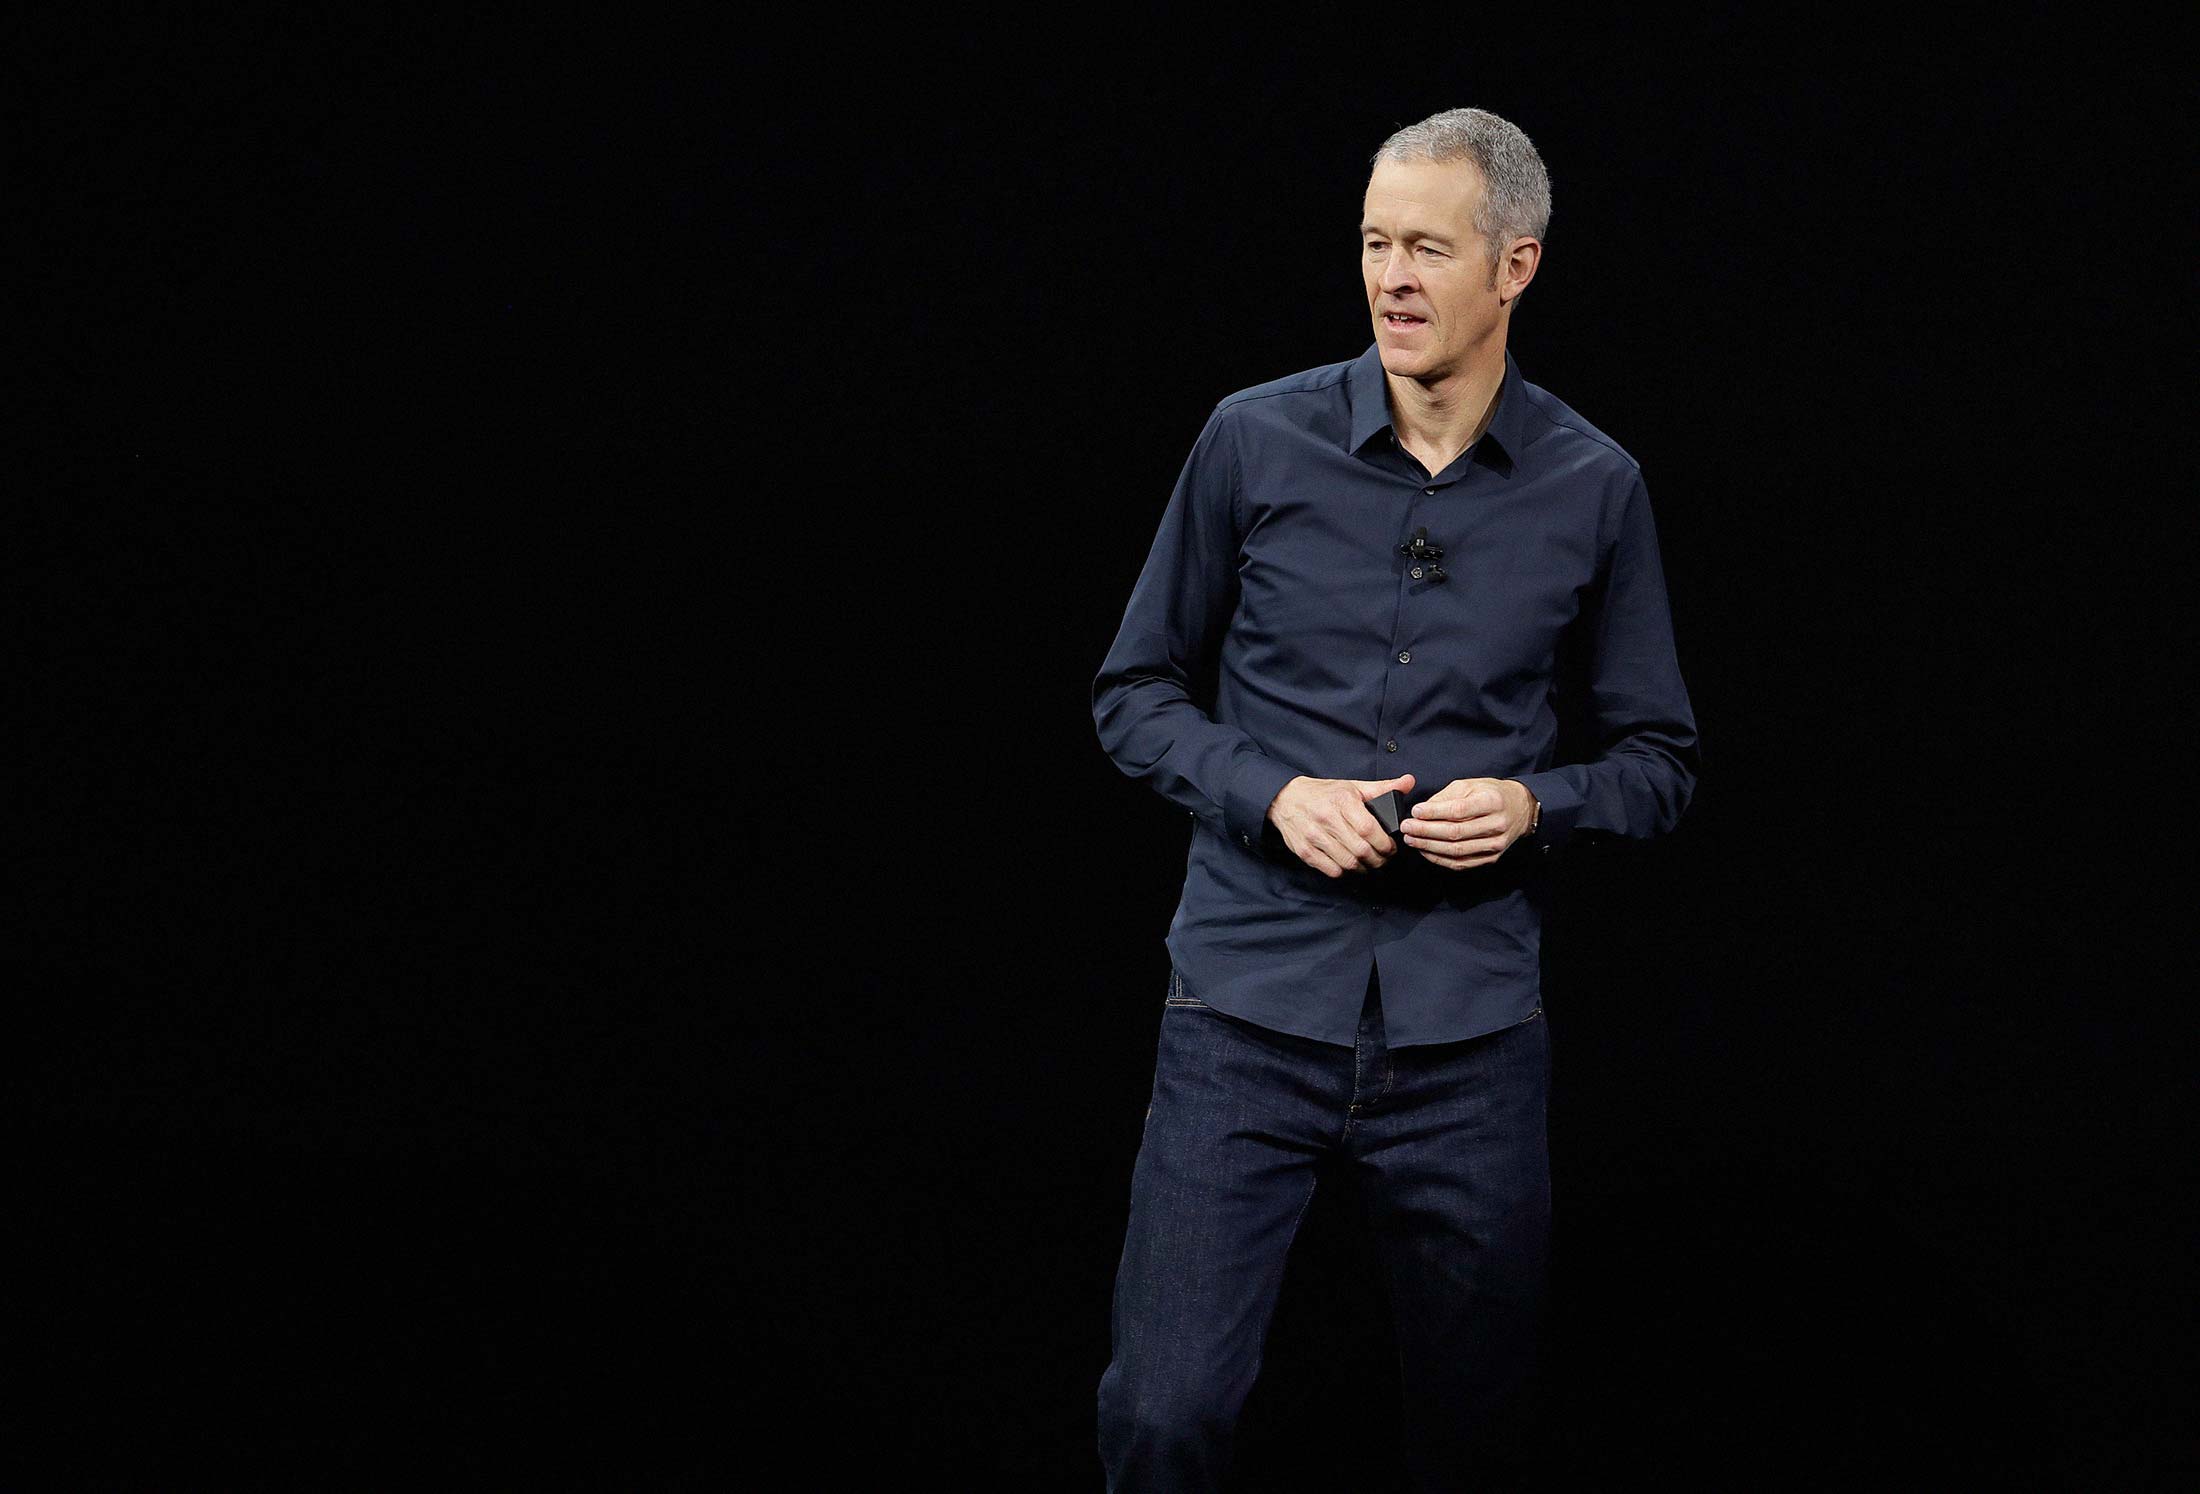 Jeff Williams, Apple’s chief operating officer, showing off new Apple Watch products at the company’s headquarters in 2017.